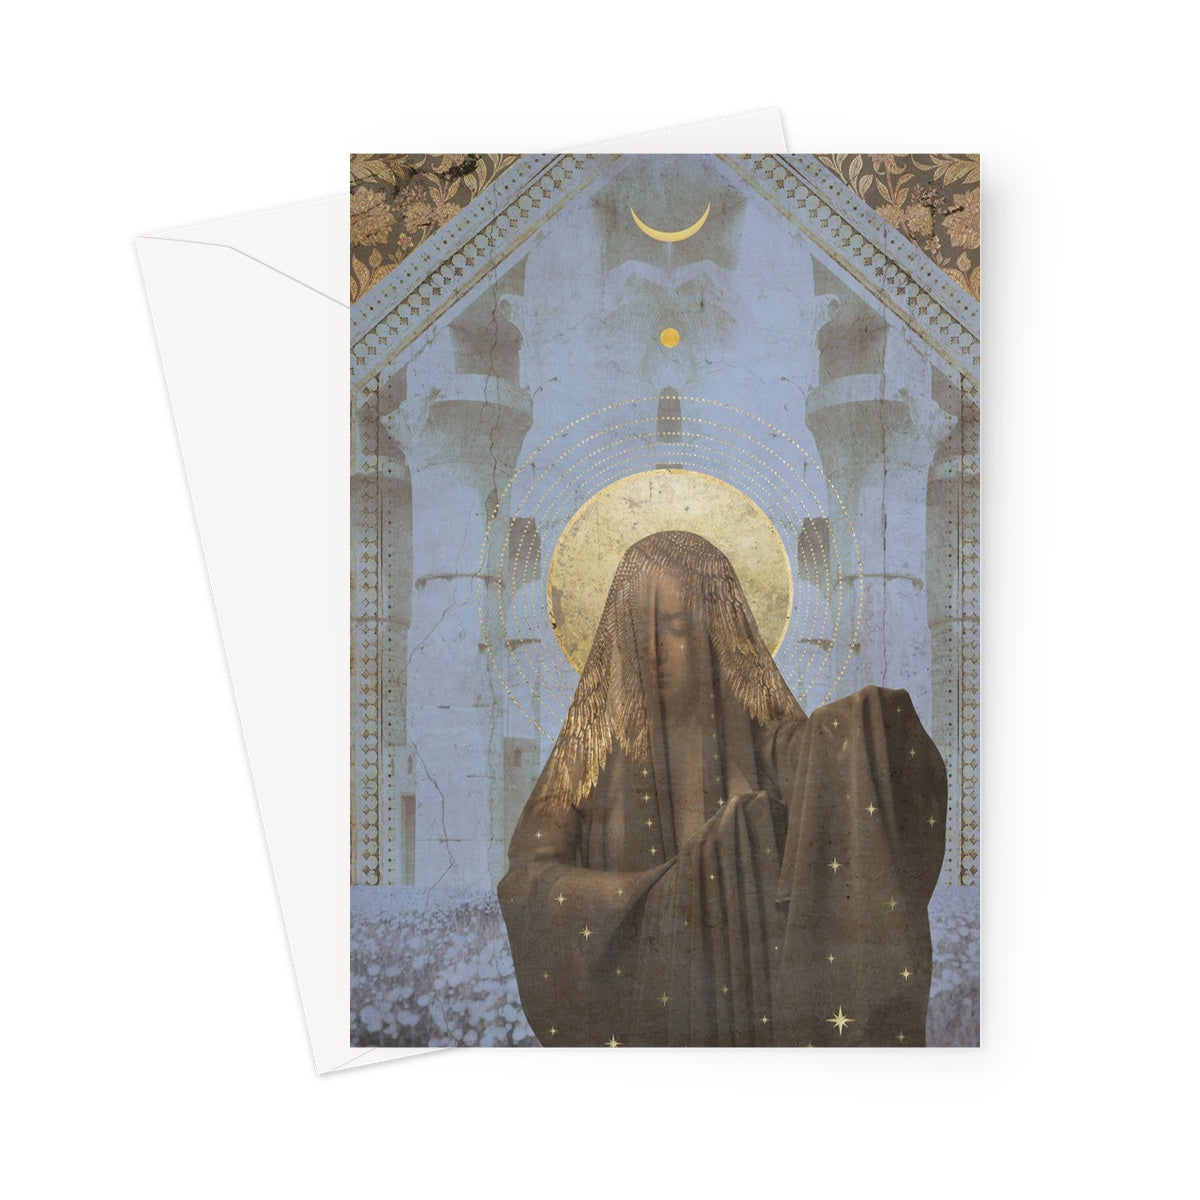 The Mystic Greeting Card - Starseed Designs Inc.